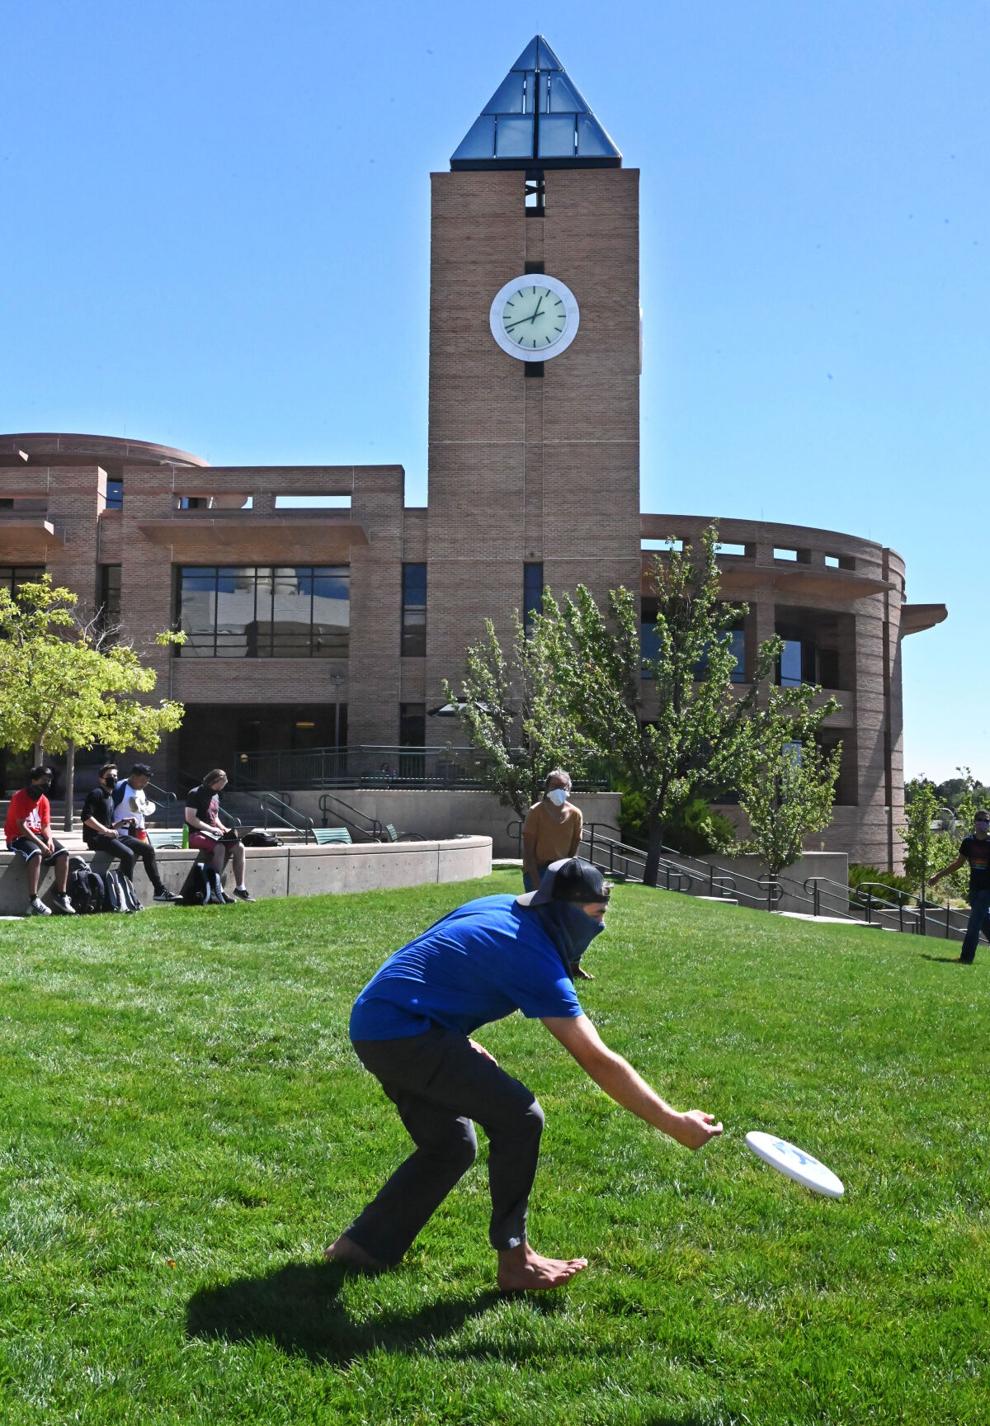 UCCS, PPCC fall enrollment decreases due to pandemic not as dire as